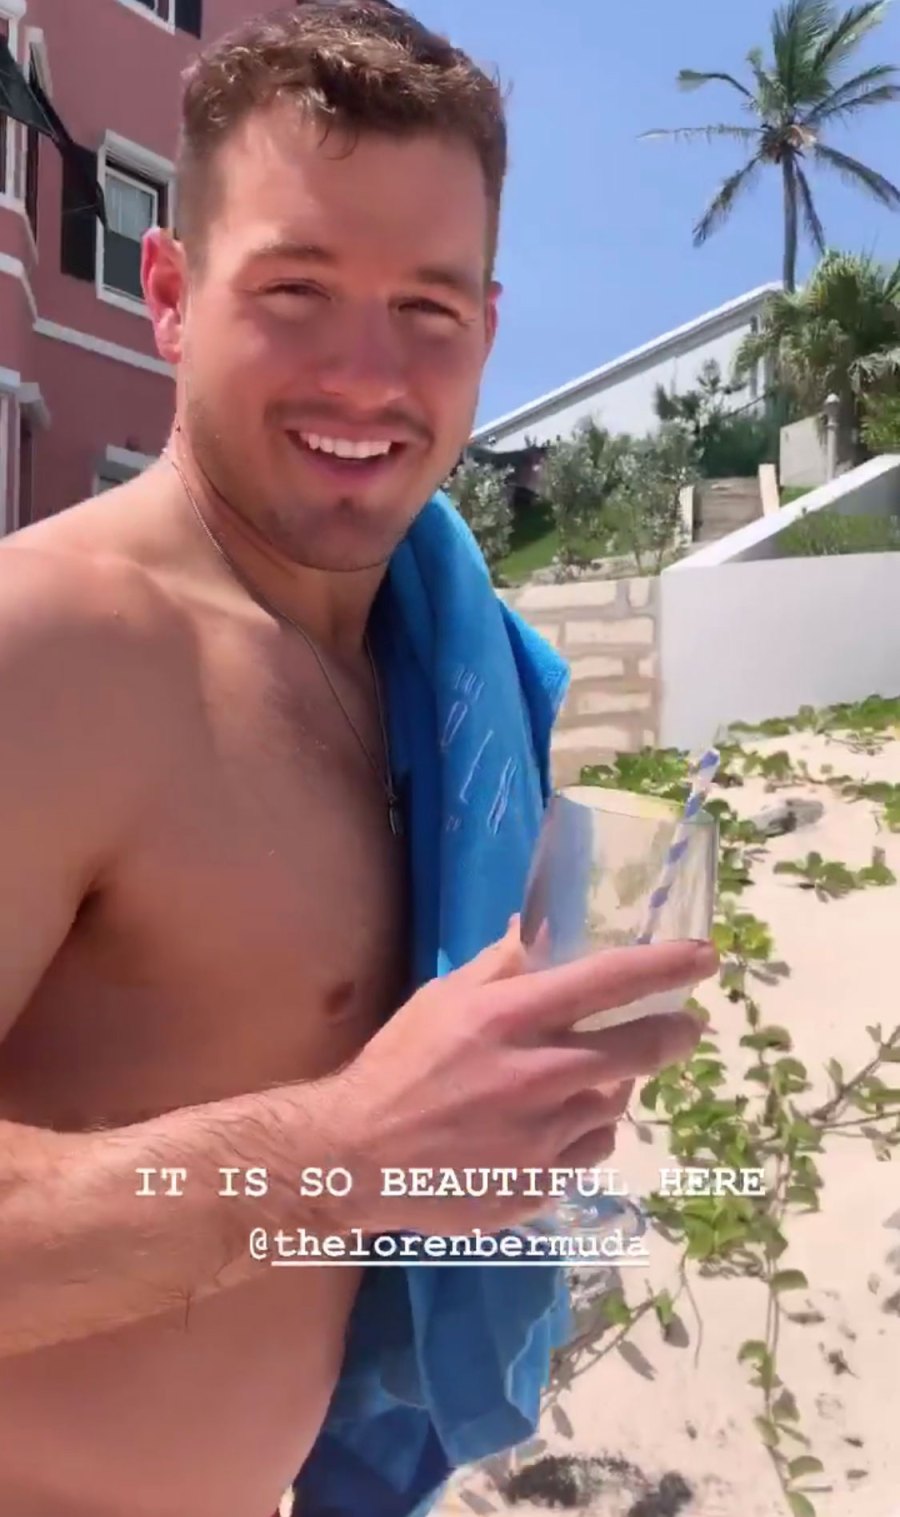 The Bachelor’s Colton Underwood and Cassie Randolph Look So in Love on Bermuda Vacation Shirtless Drinking